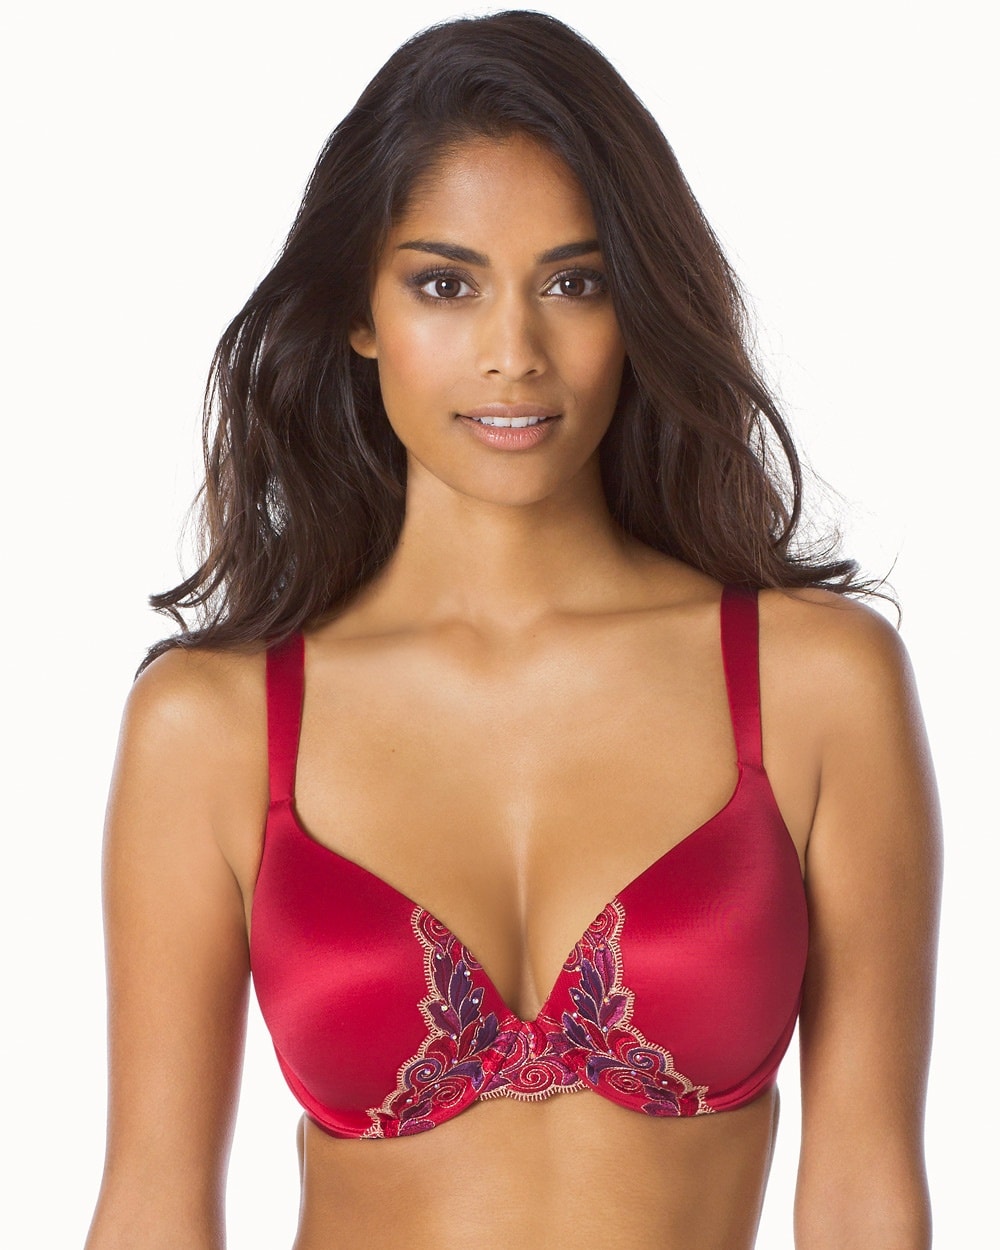 Limited Edition Enhancing Shape Full Coverage Lace Trim Bra